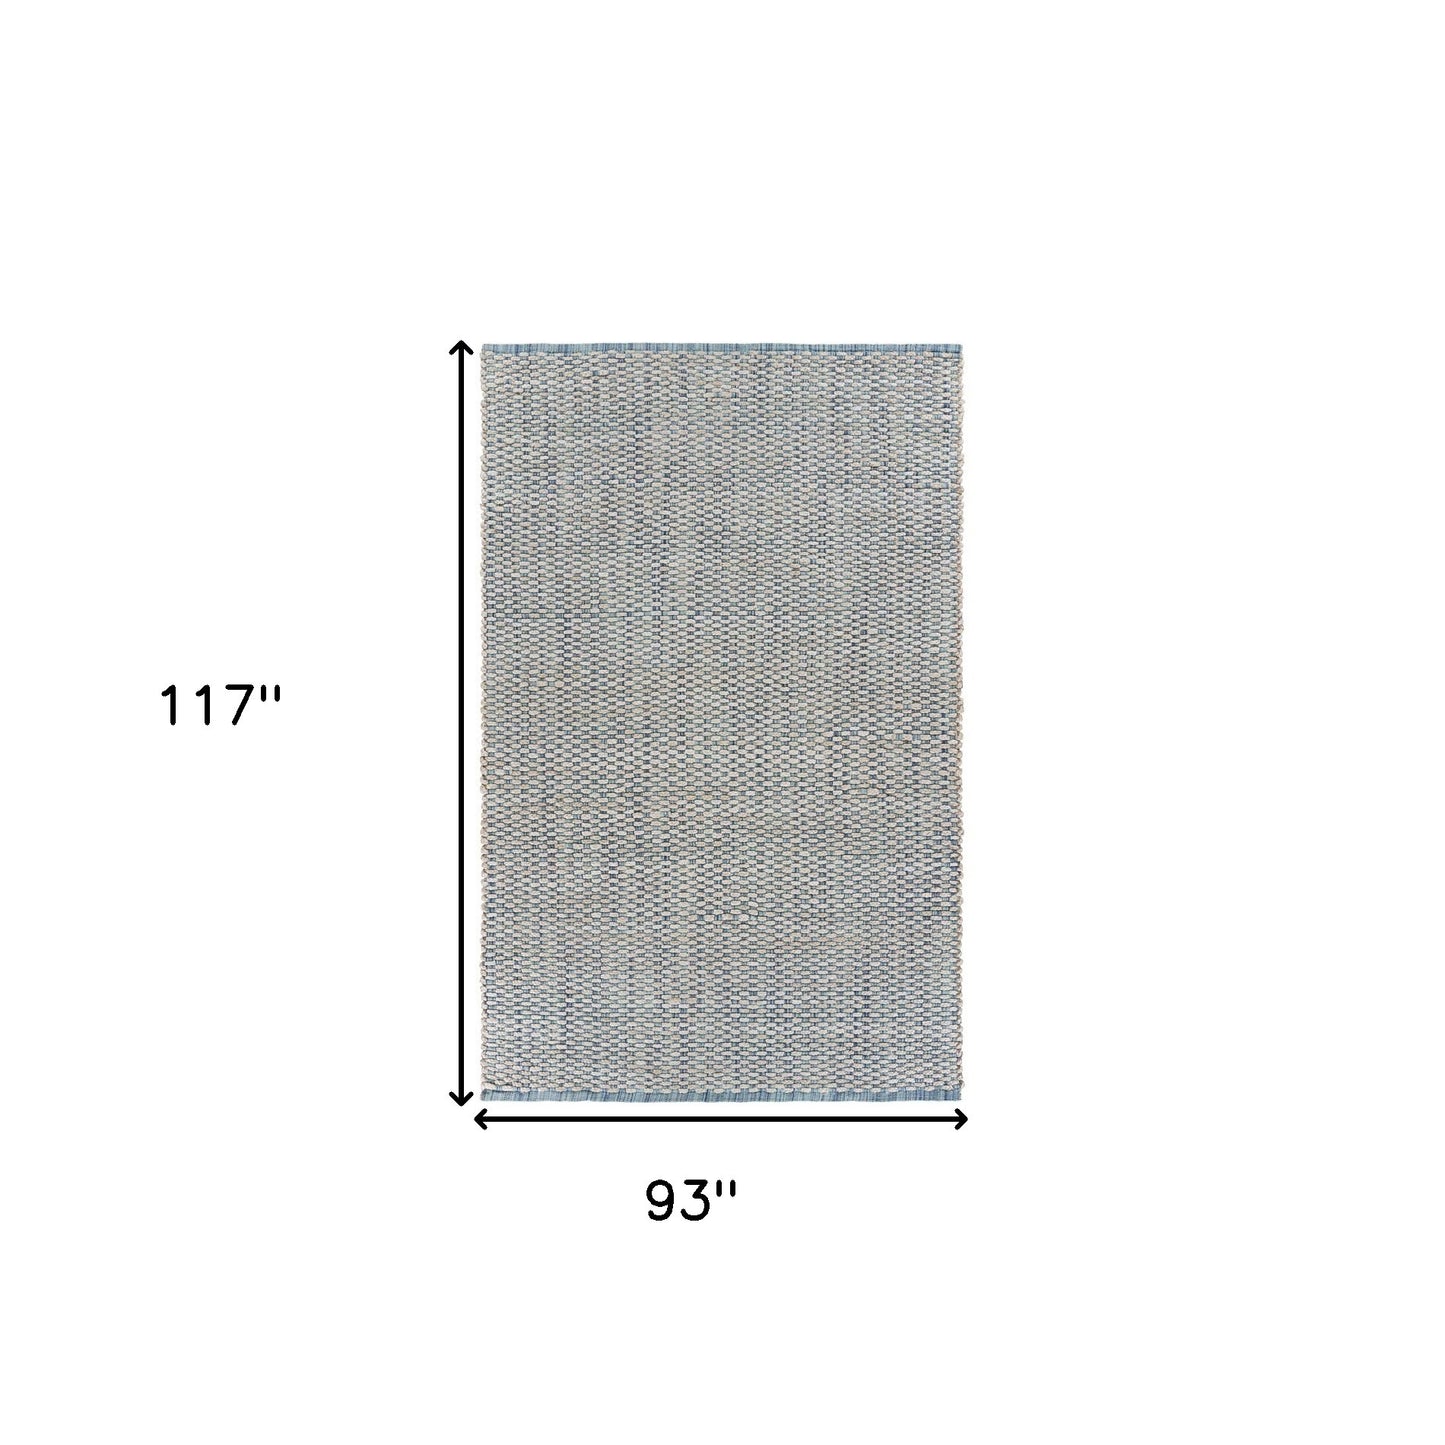 8’ x 10’ Blue and Beige Toned Area Rug